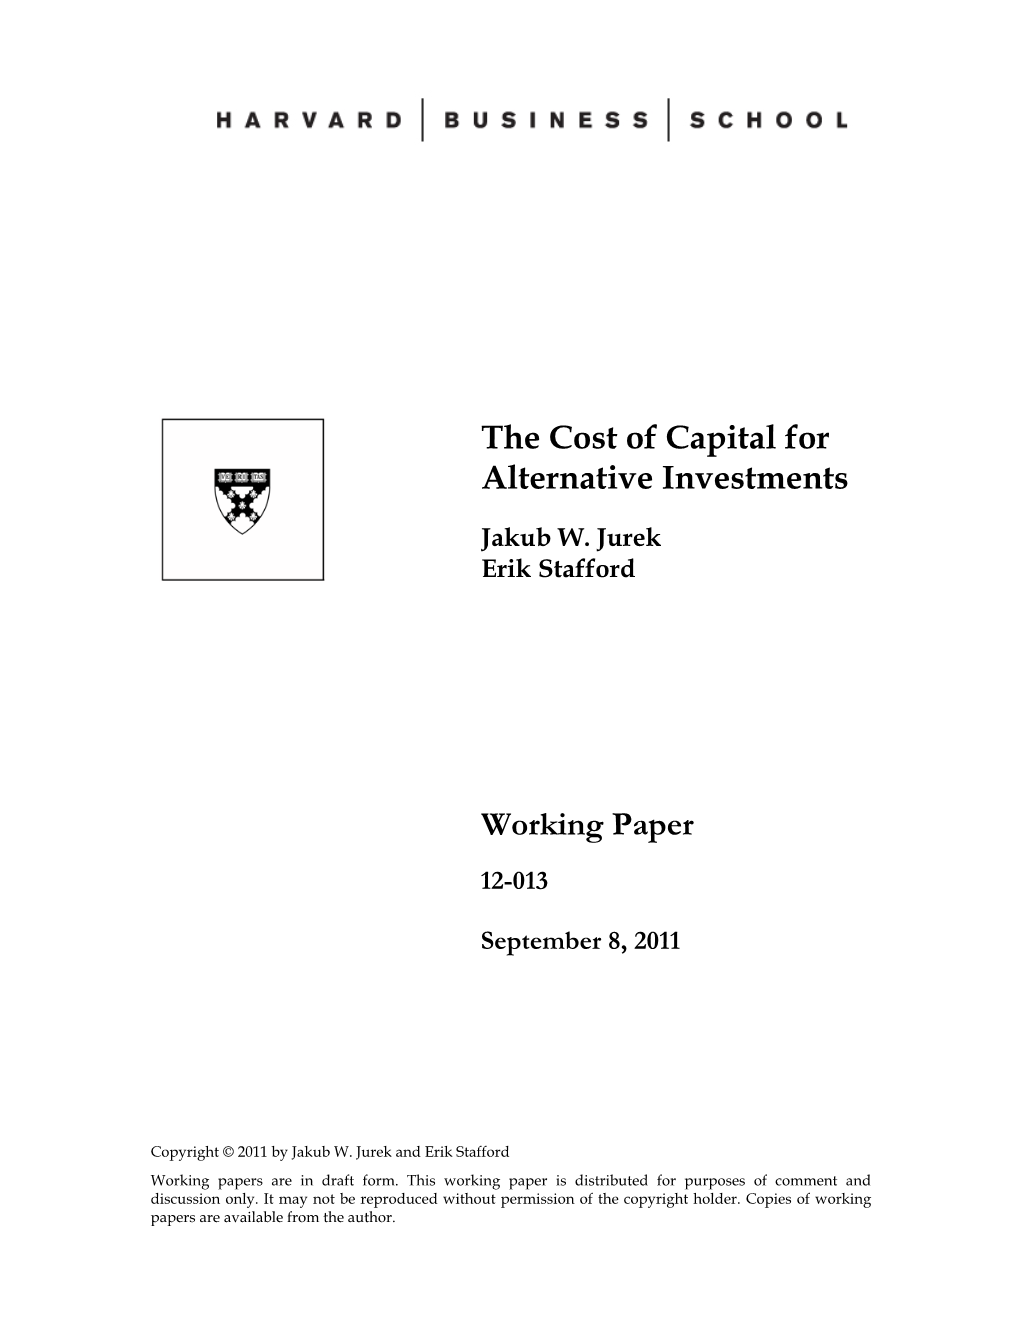 The Cost of Capital for Alternative Investments Working Paper